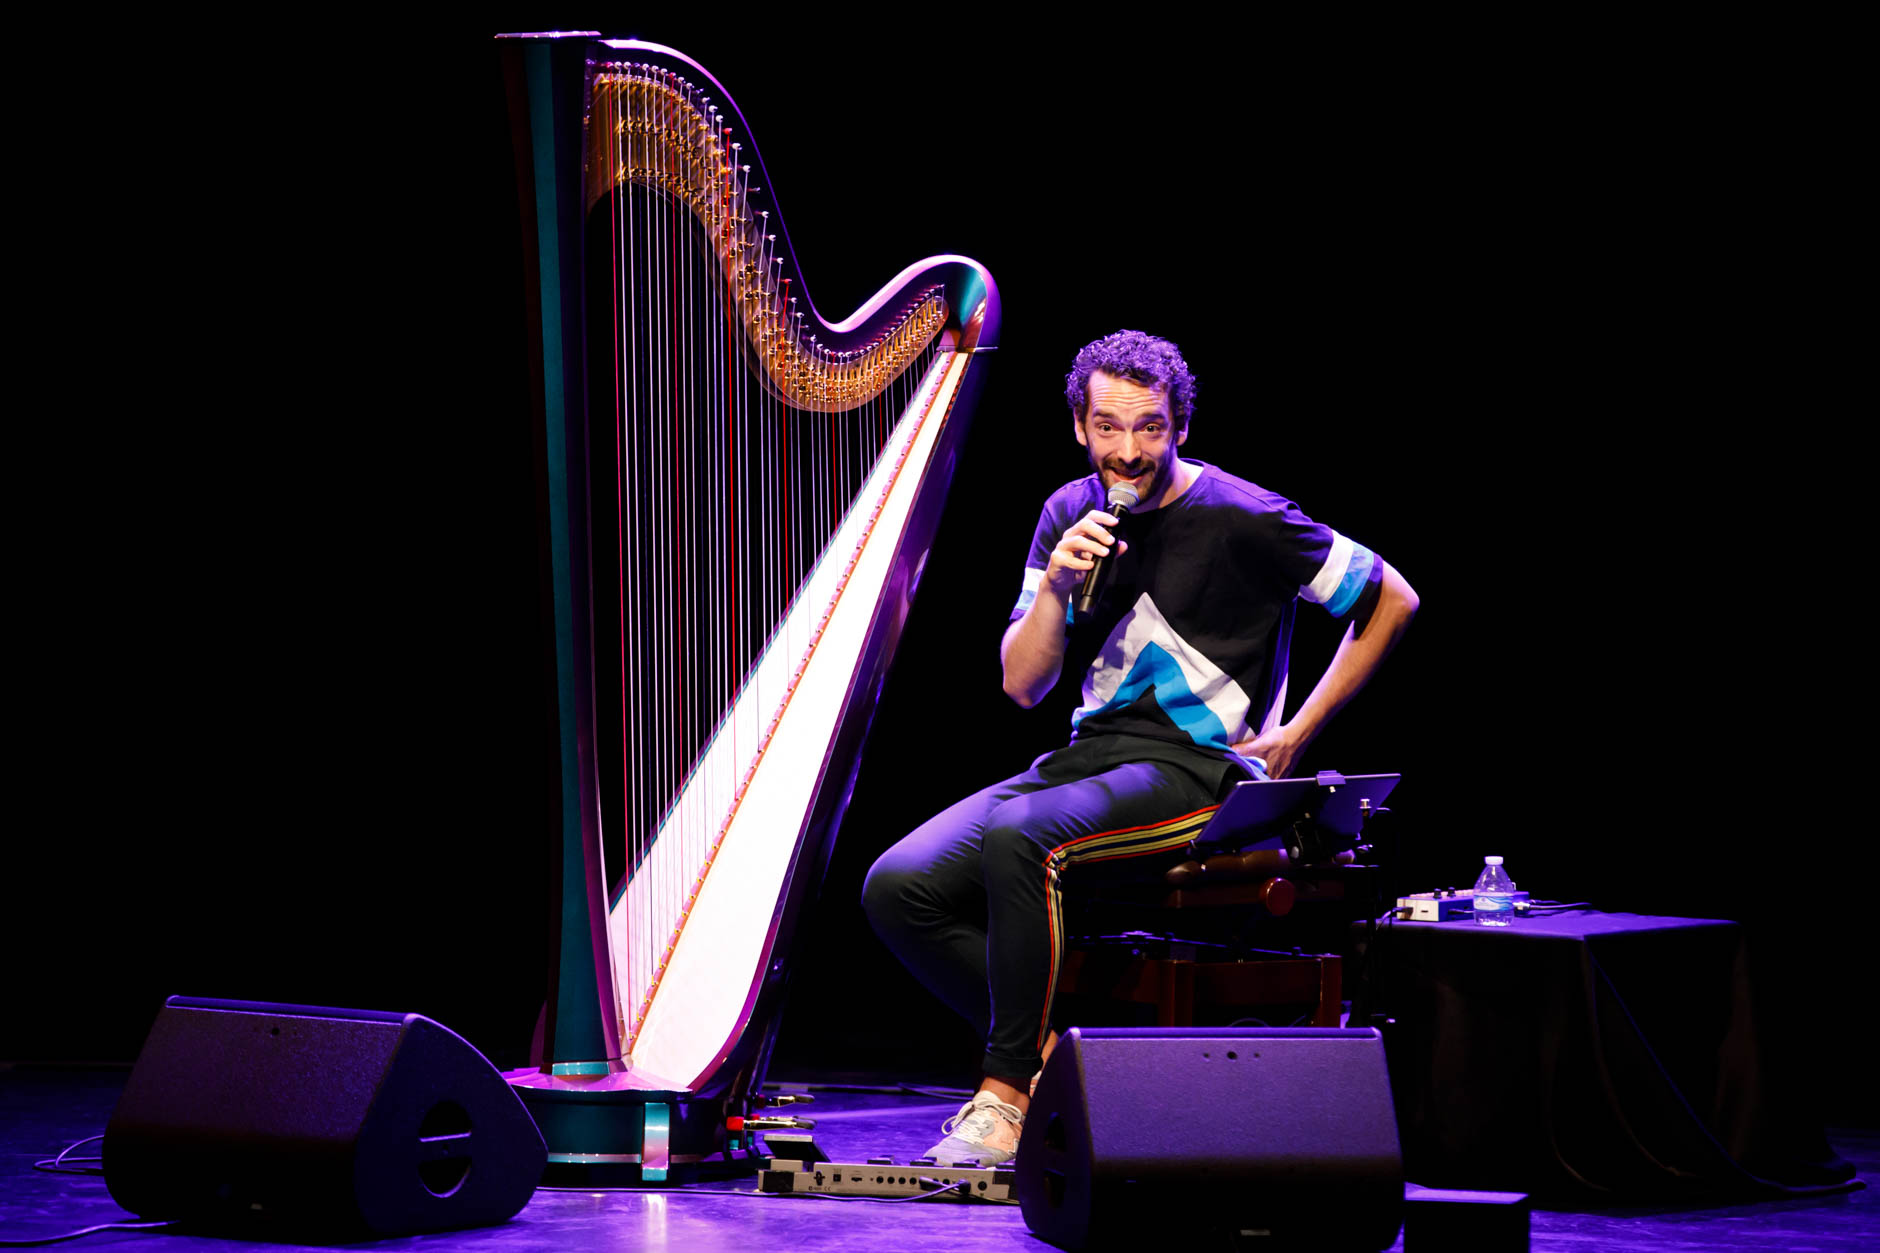 Remy van Kesteren speaks to the audience during his laureate recital at the 11th USA International Harp Competition at the Buskirk-Chumley Theater in Bloomington, Indiana on Saturday, July 6, 2019. (Photo by James Brosher)